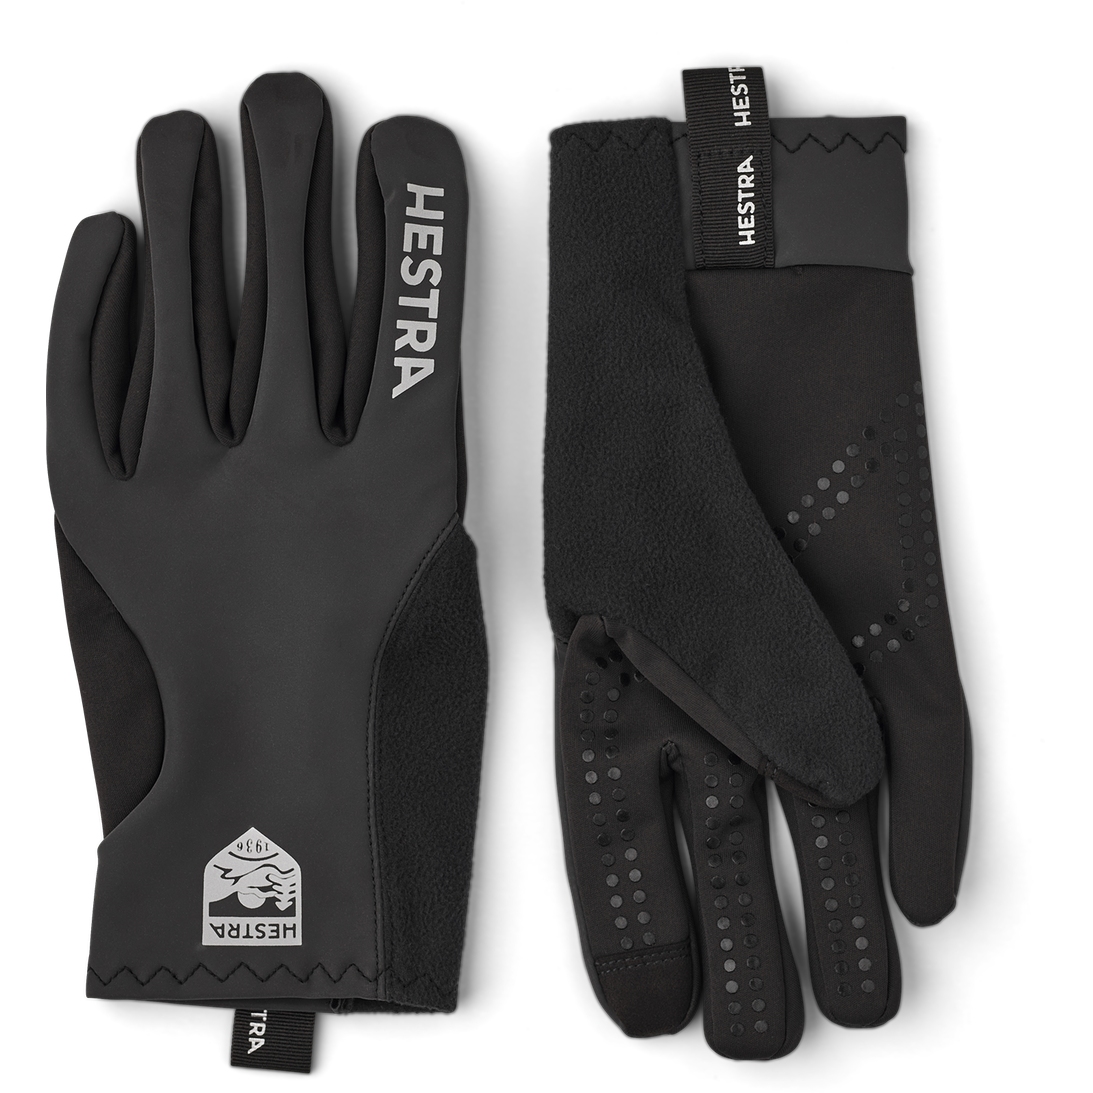 Picture of Hestra Runners All Weather - 5 Finger Running Gloves - dark grey